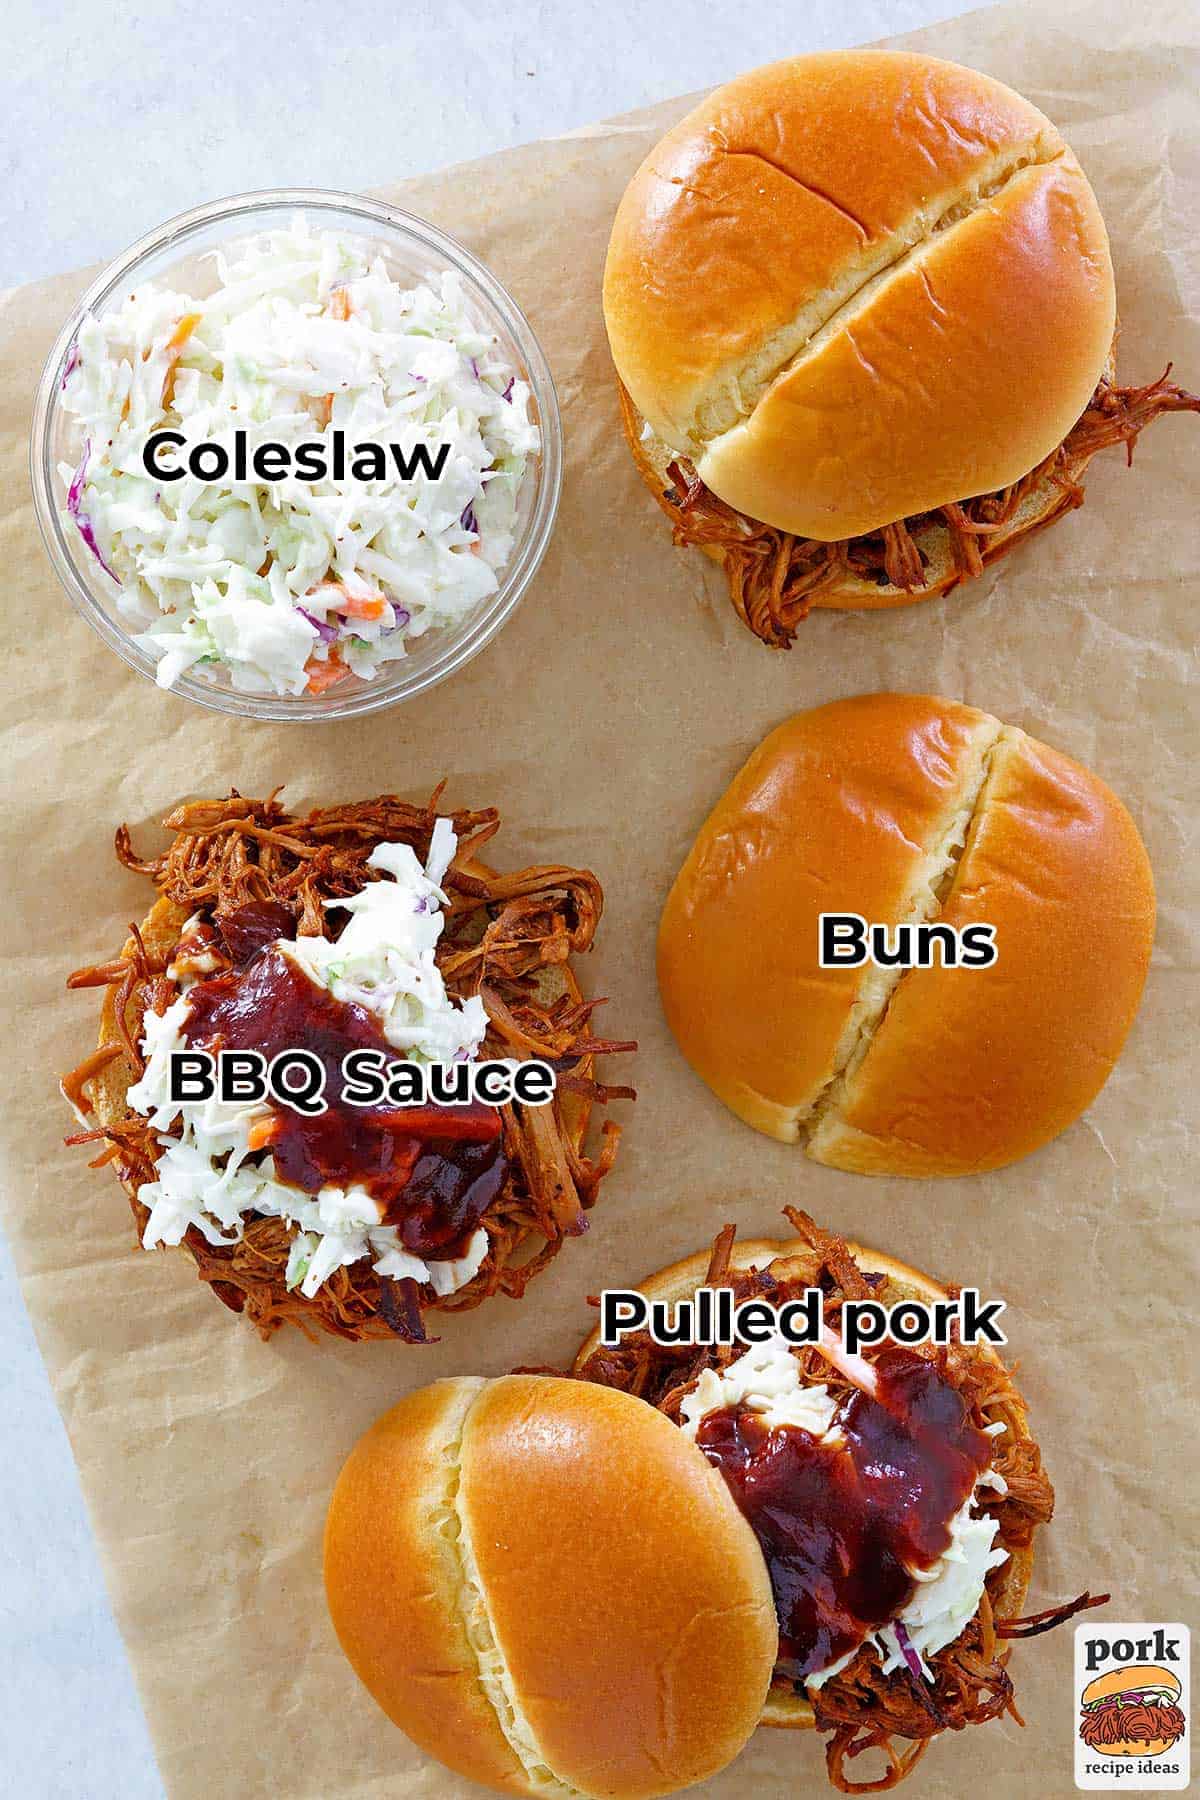 all the ingredients for pulled pork sandwiches with labels